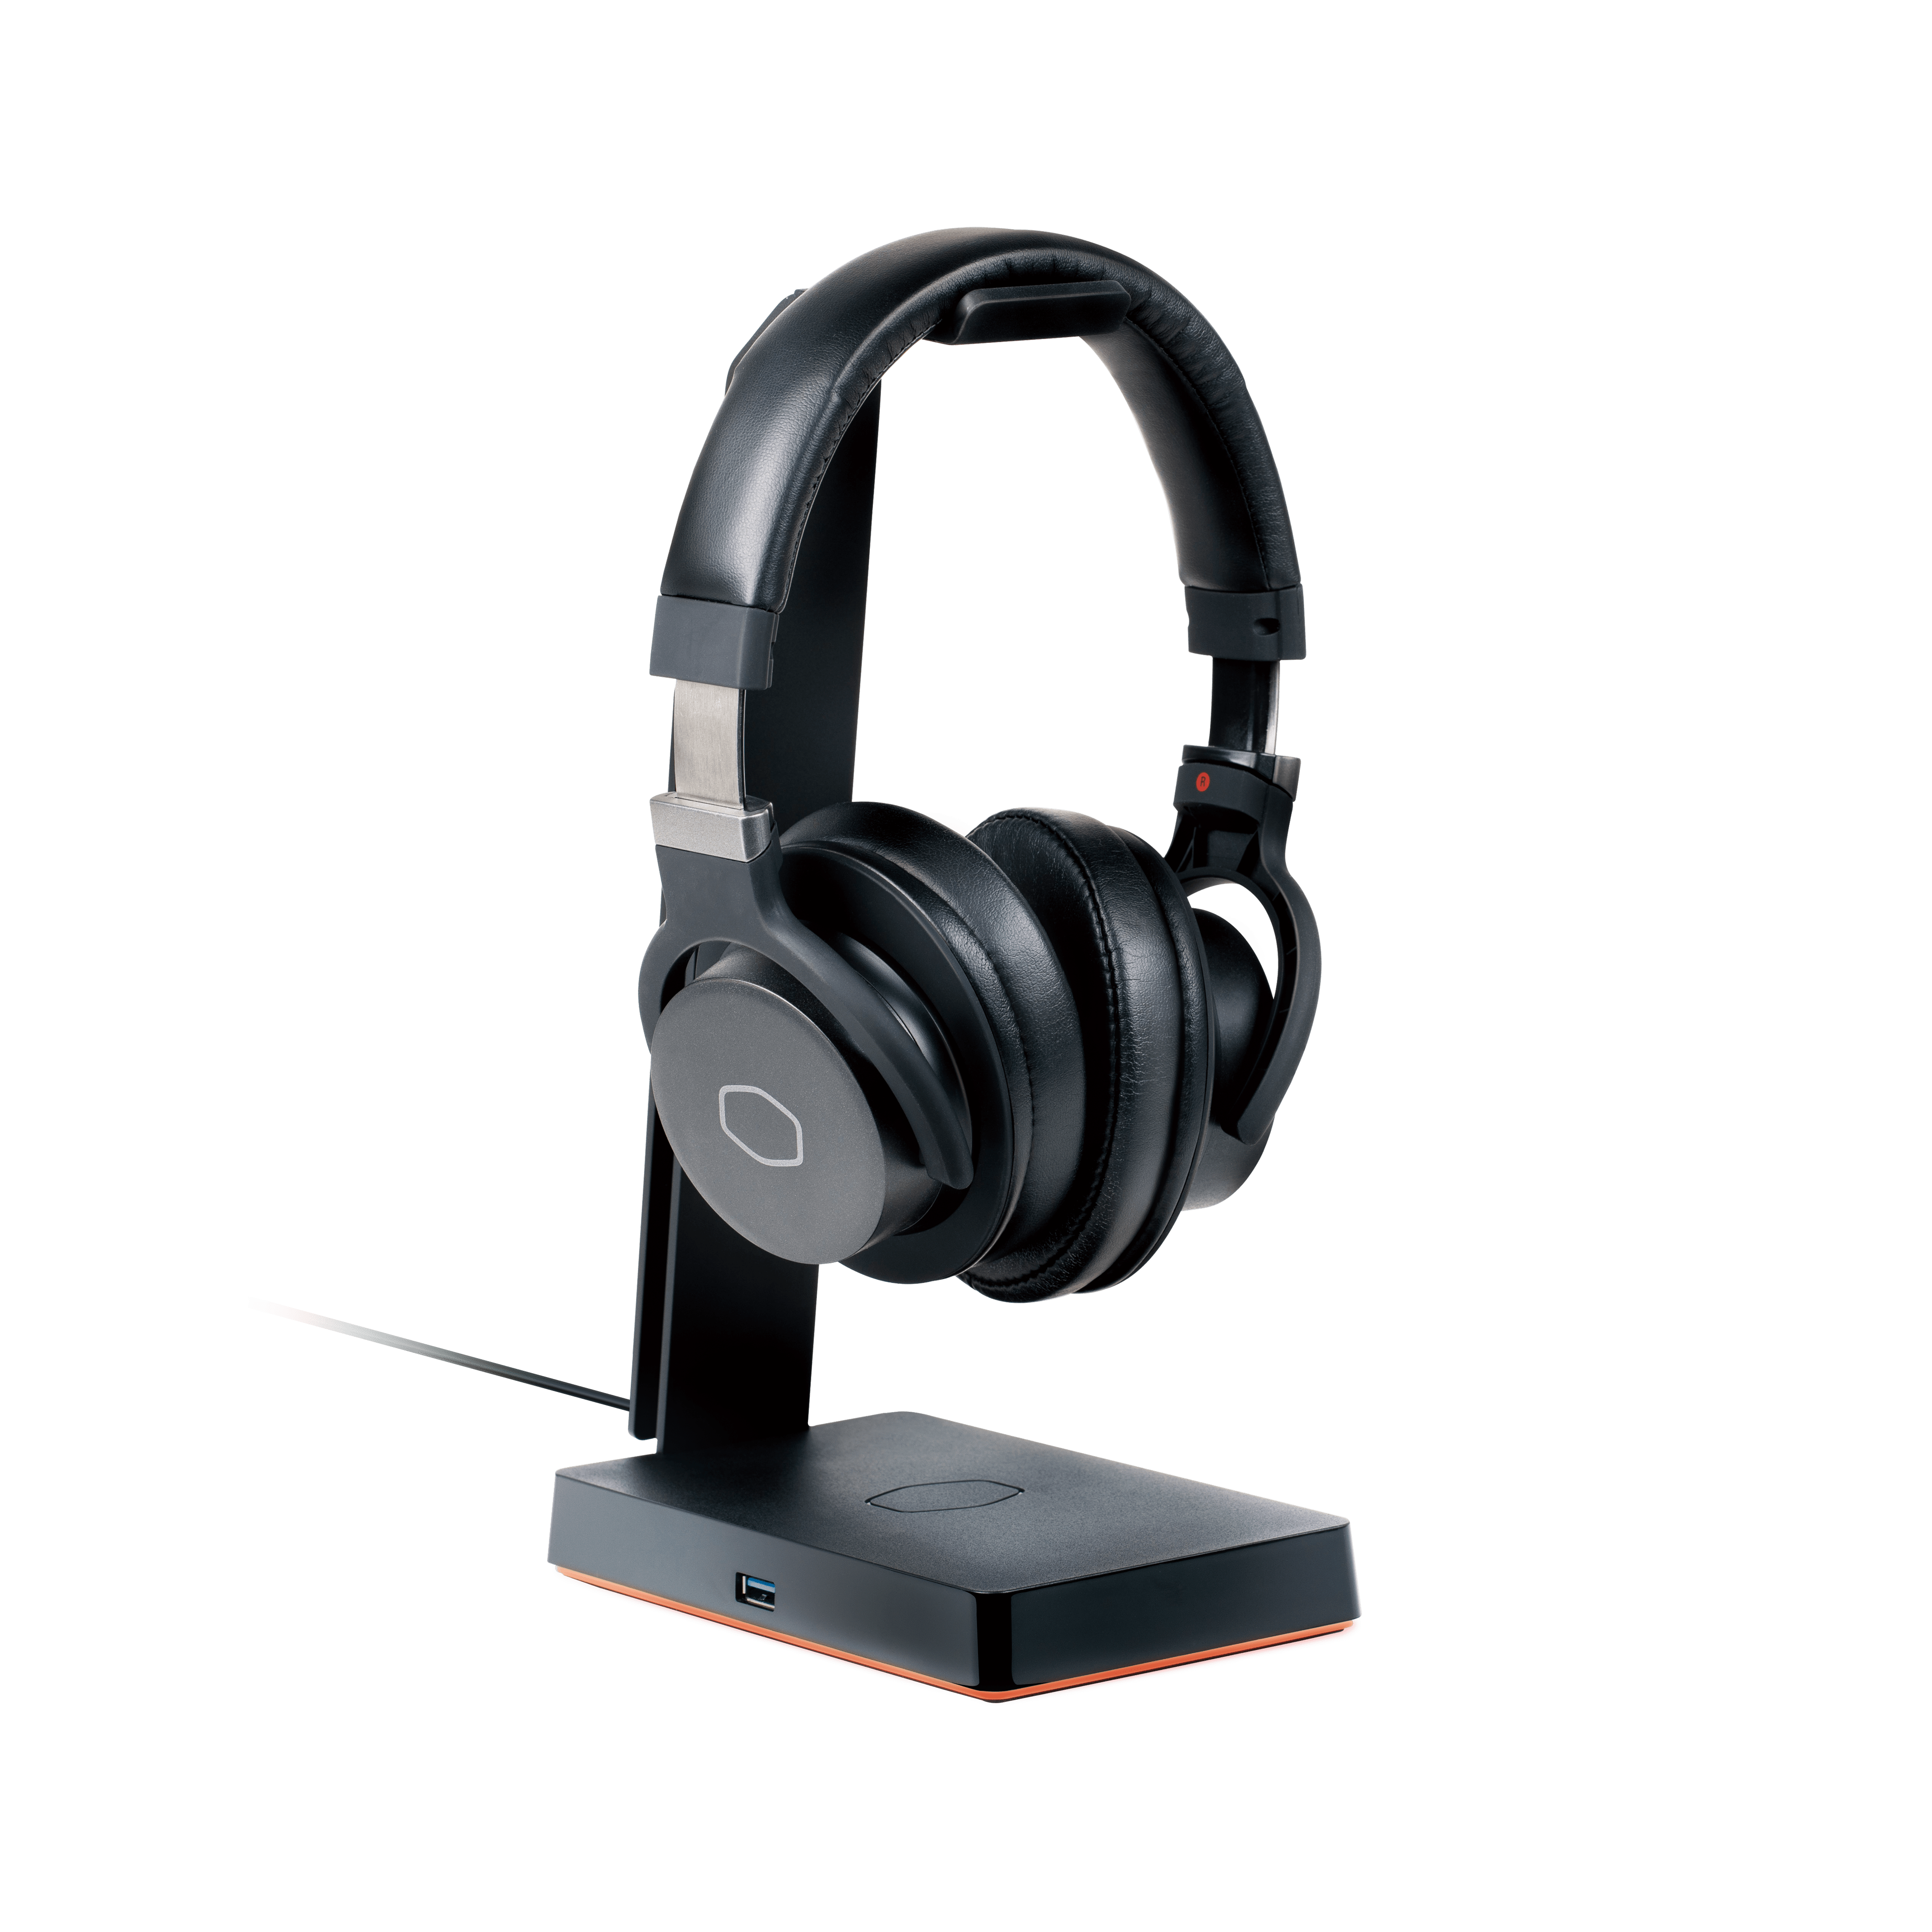 Cooler Master GS750 Is The RGB Gaming Headset Stand You Didn’t Think You Needed